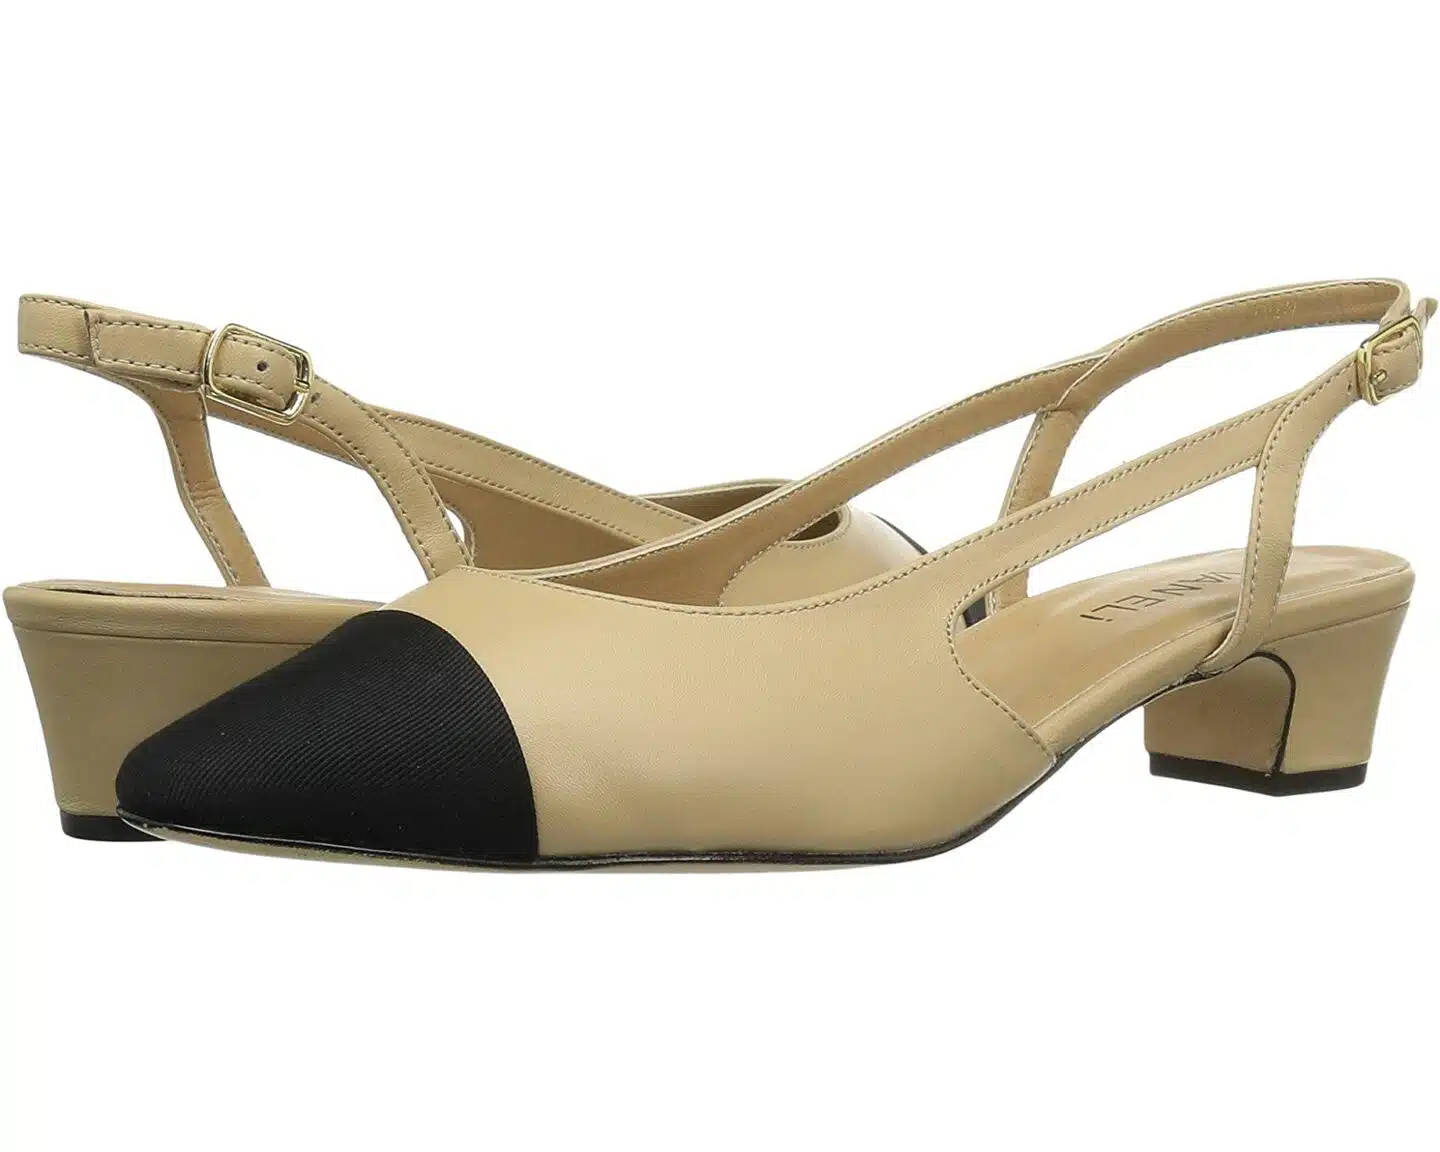 Chanel slingback heel dupes in nude and black leather.